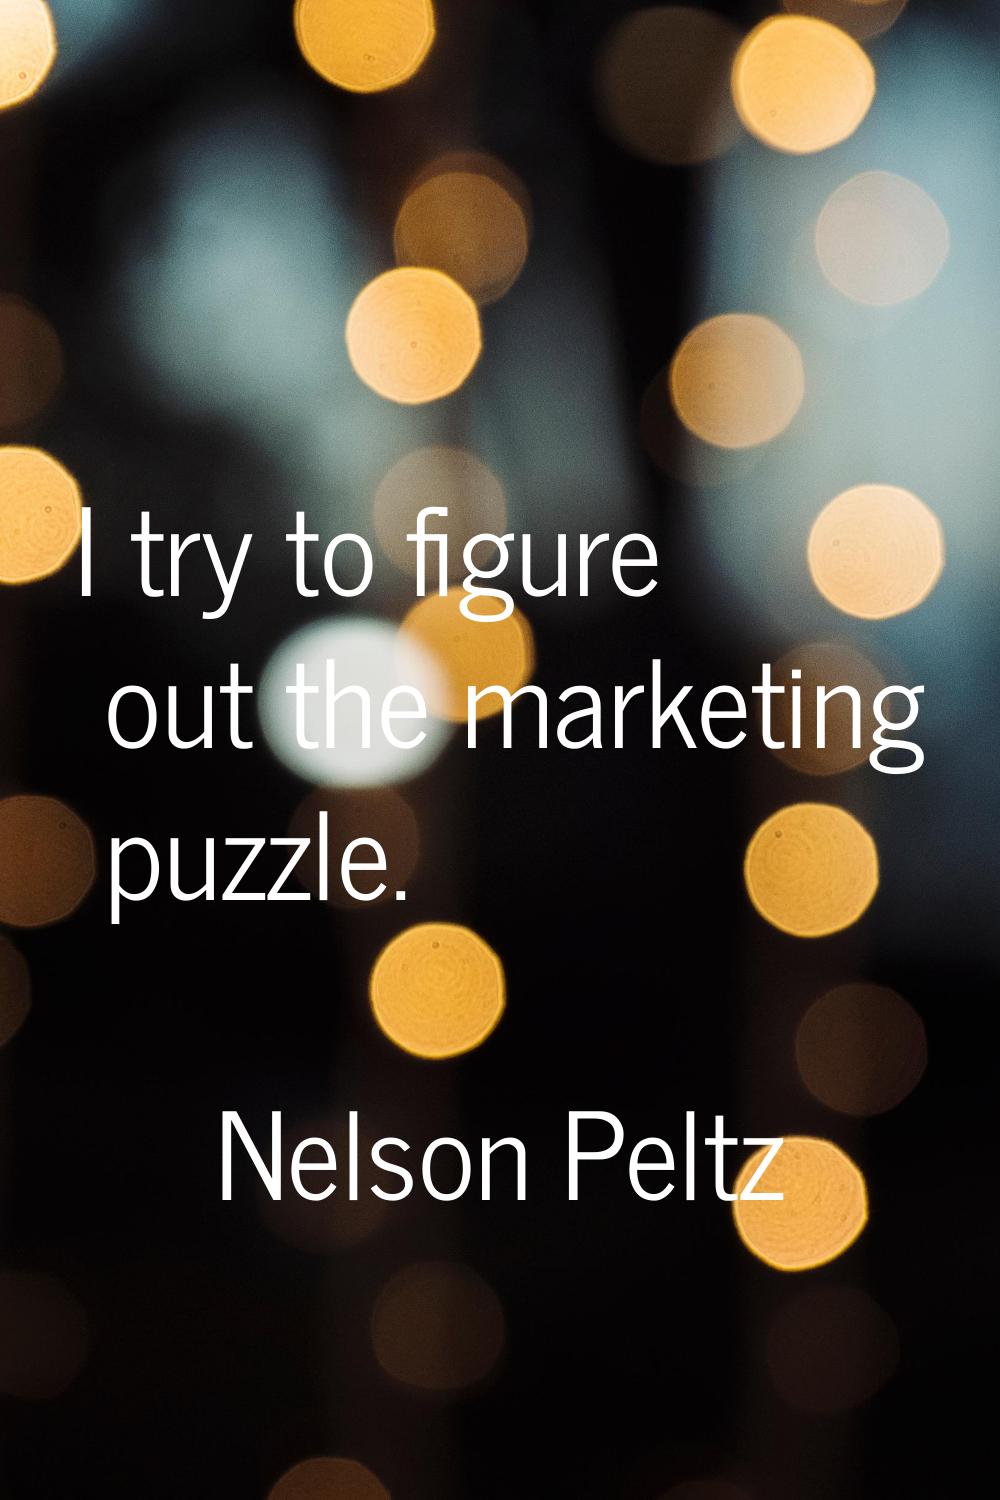 I try to figure out the marketing puzzle.